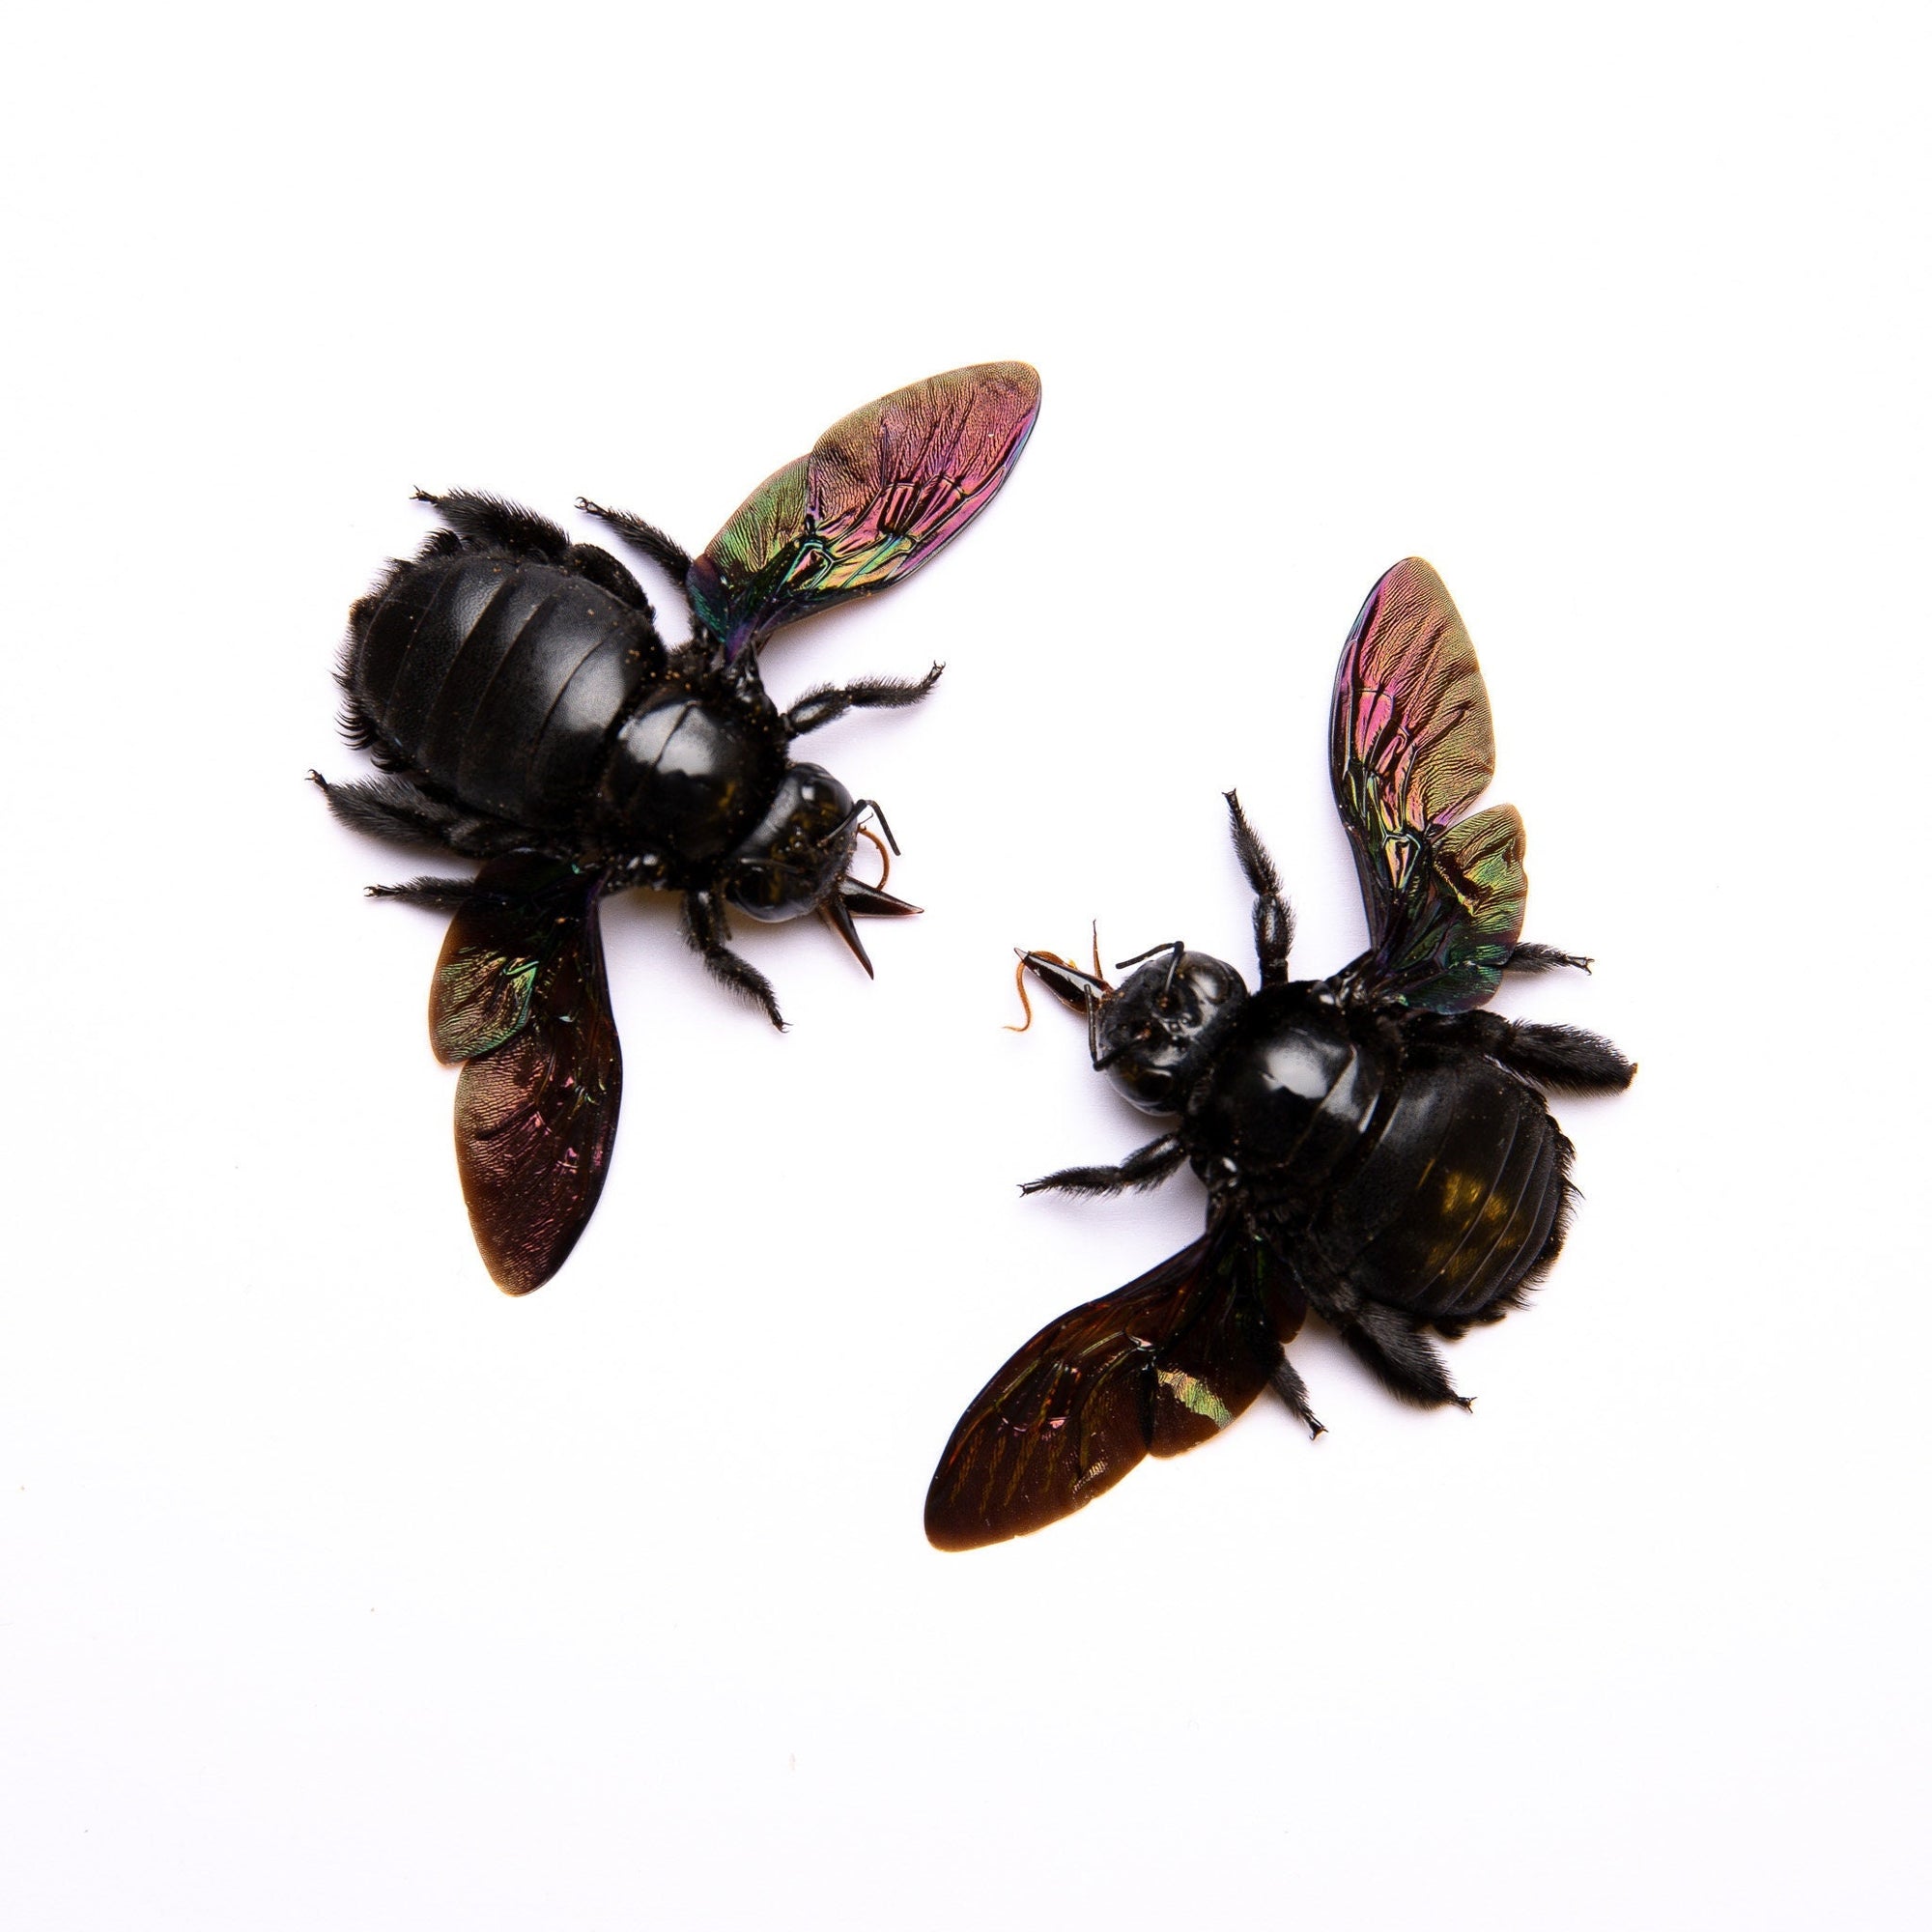 TWO (2) Giant Black Carpenter Bees (Xylocopa latipes) | A1 Spread Specimens